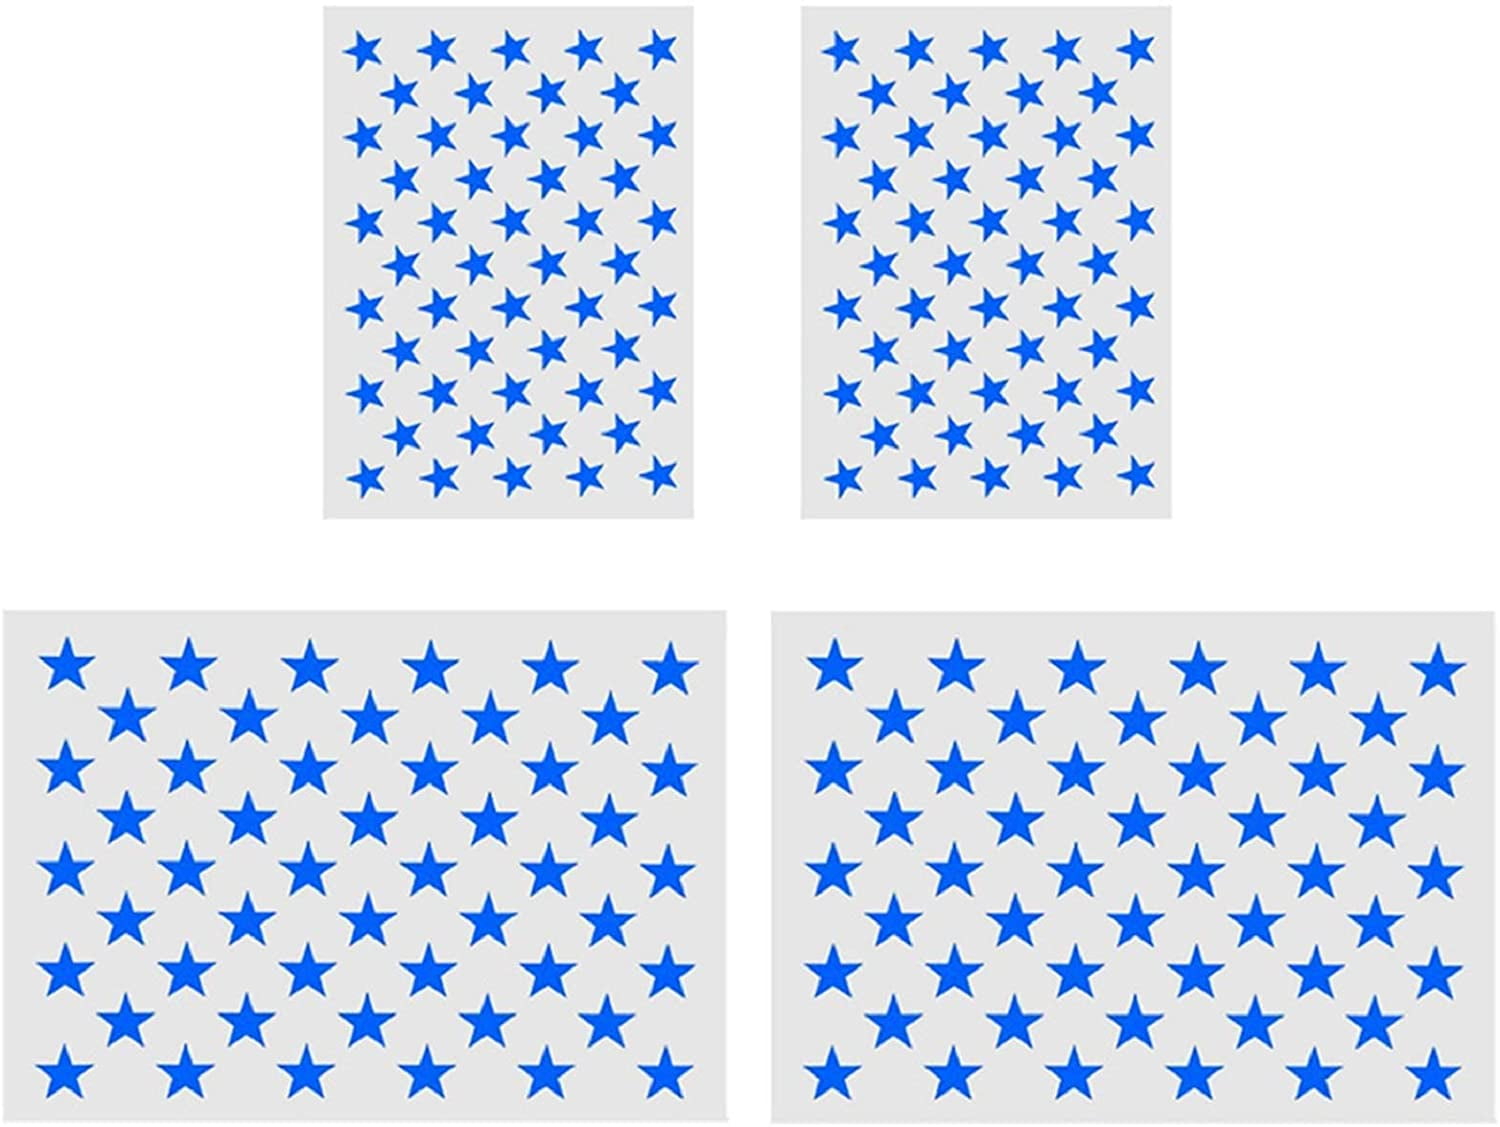 4 Pieces Star Stencil 50 Stars American Flag Template for Painting on Fabric,Airbrush,Wood,2 Large and 2 Medium Reusable Starfield Stencils 